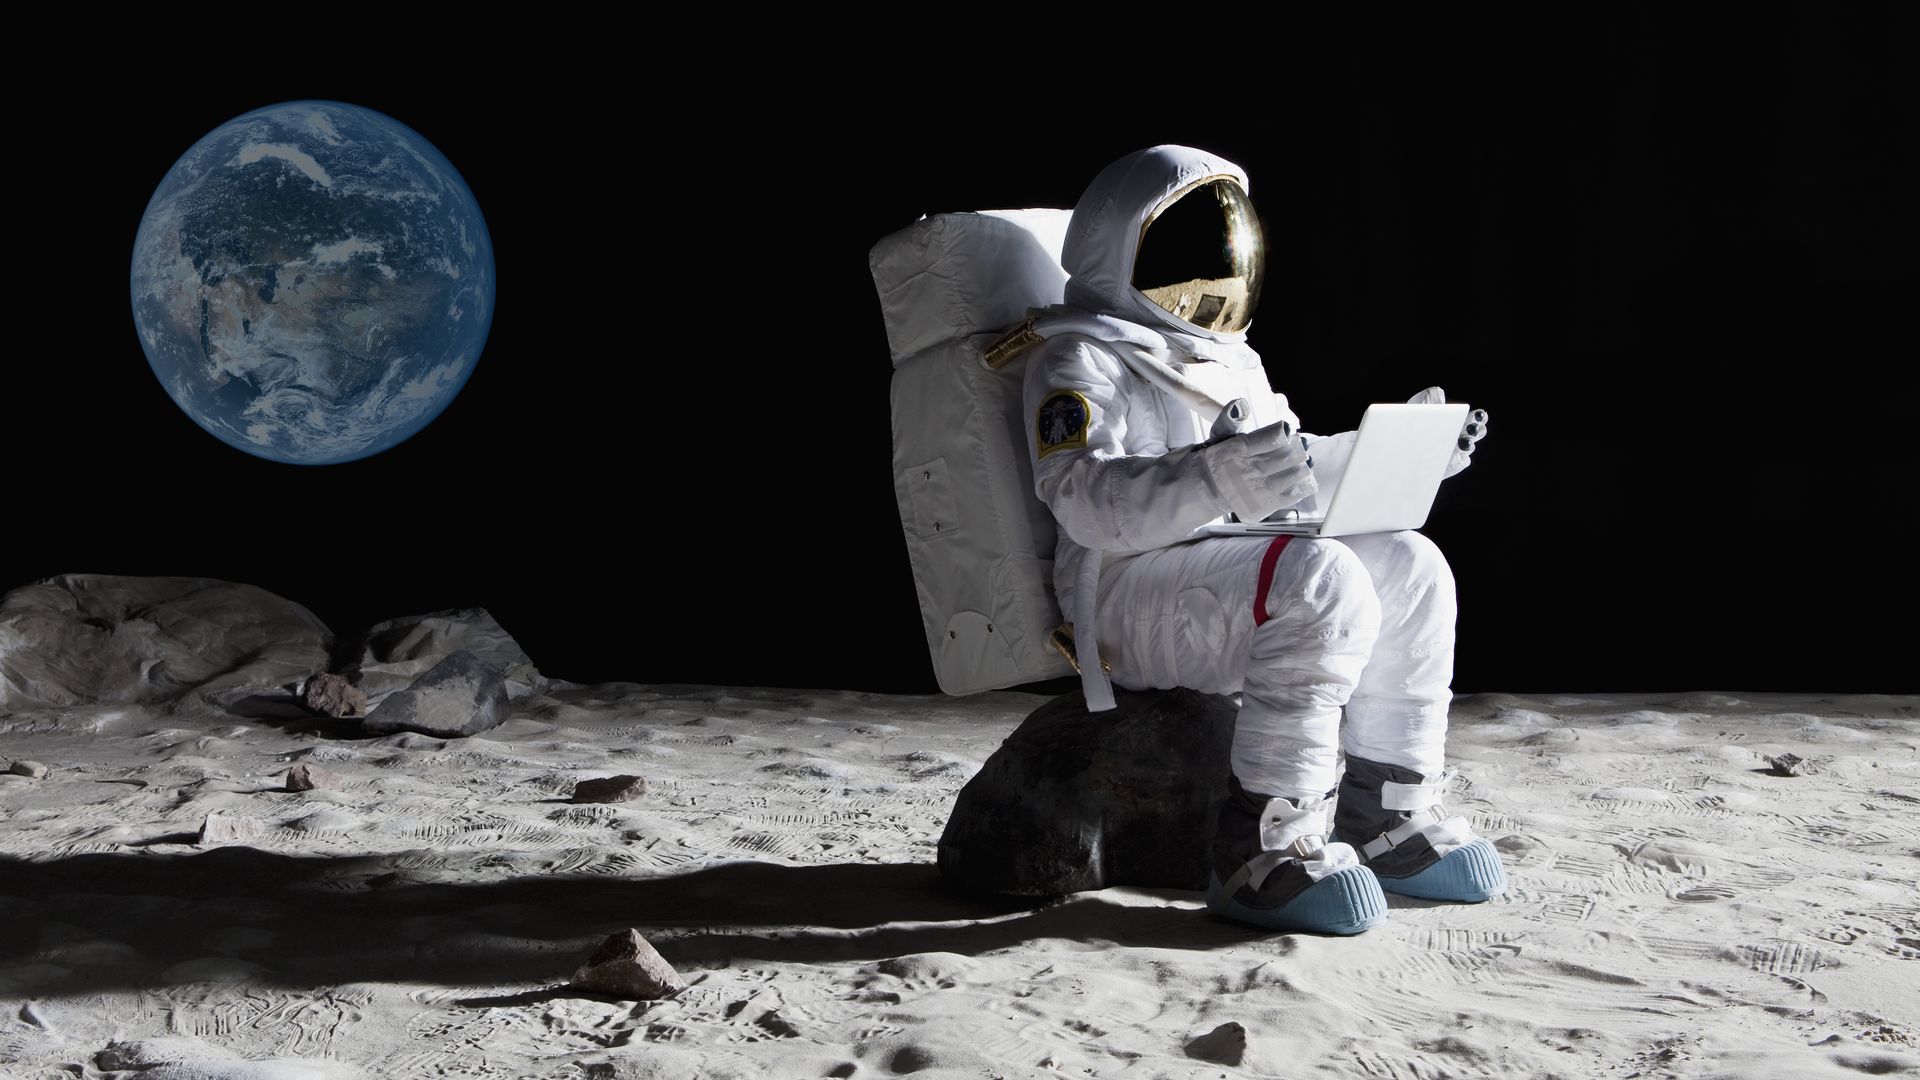 Man uses laptop on the moon.